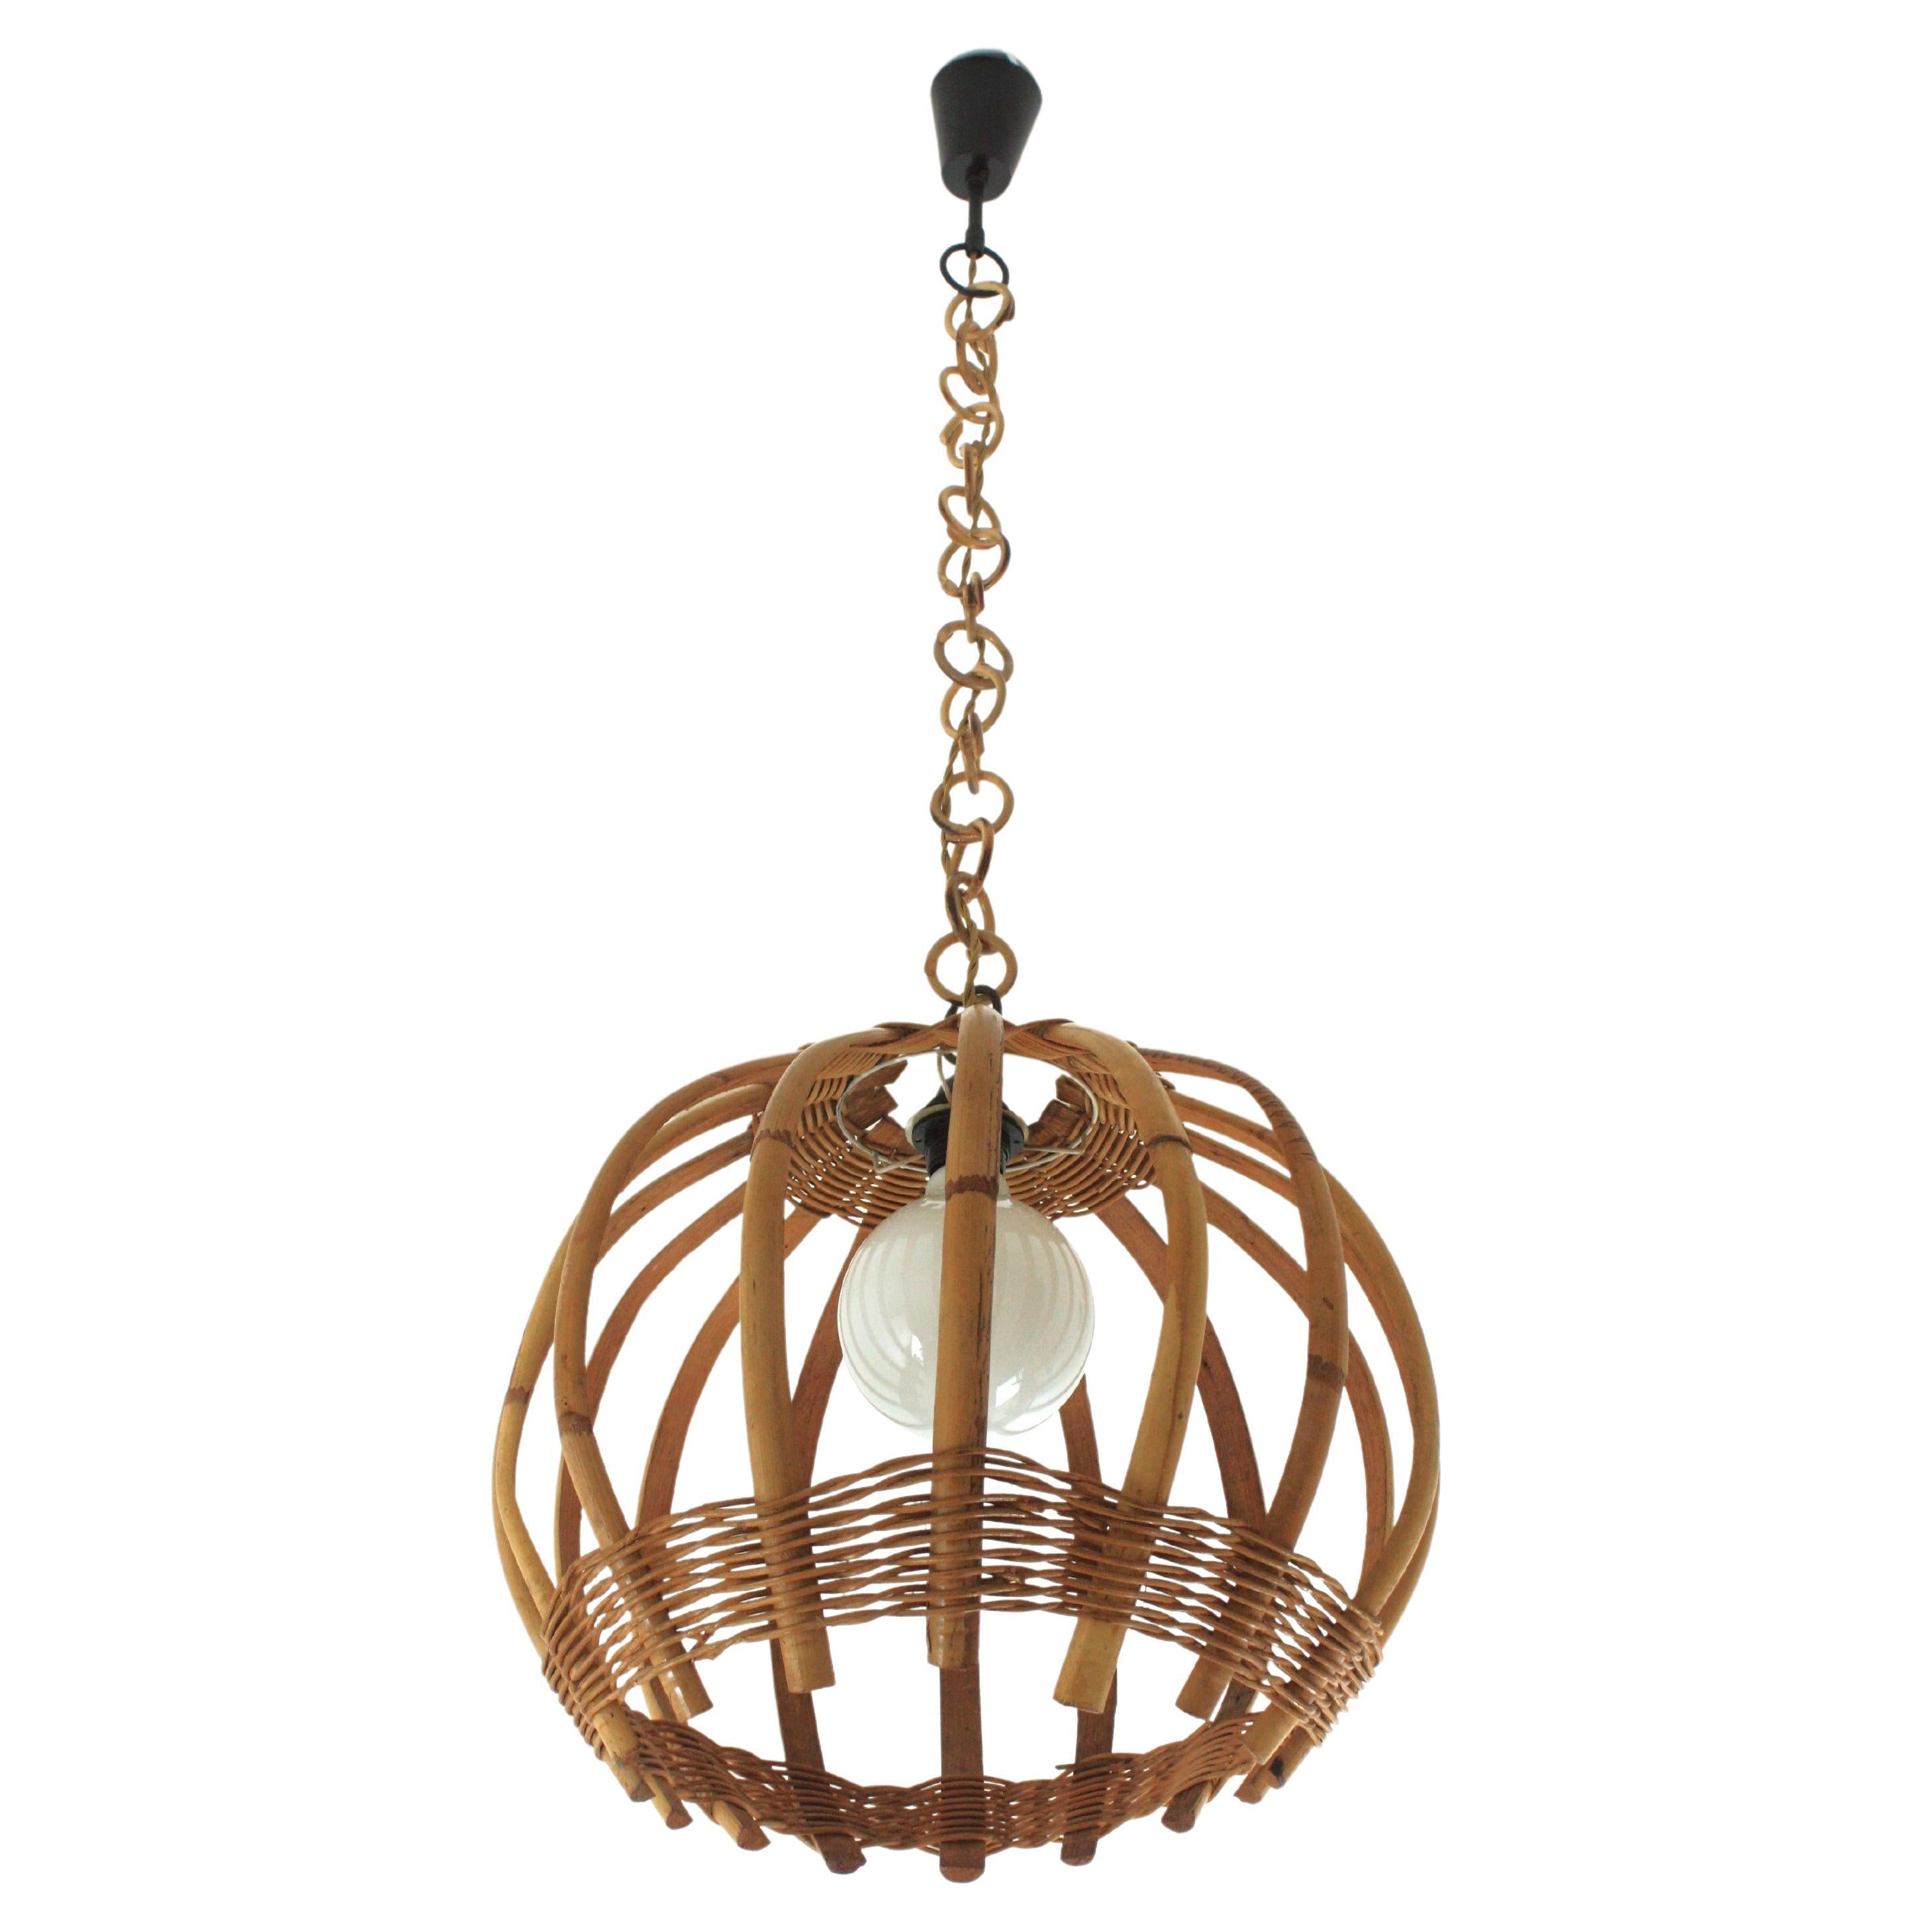 1960s Large Bamboo Rattan Round Shaped Pendant Light with Woven Wicker Detail For Sale